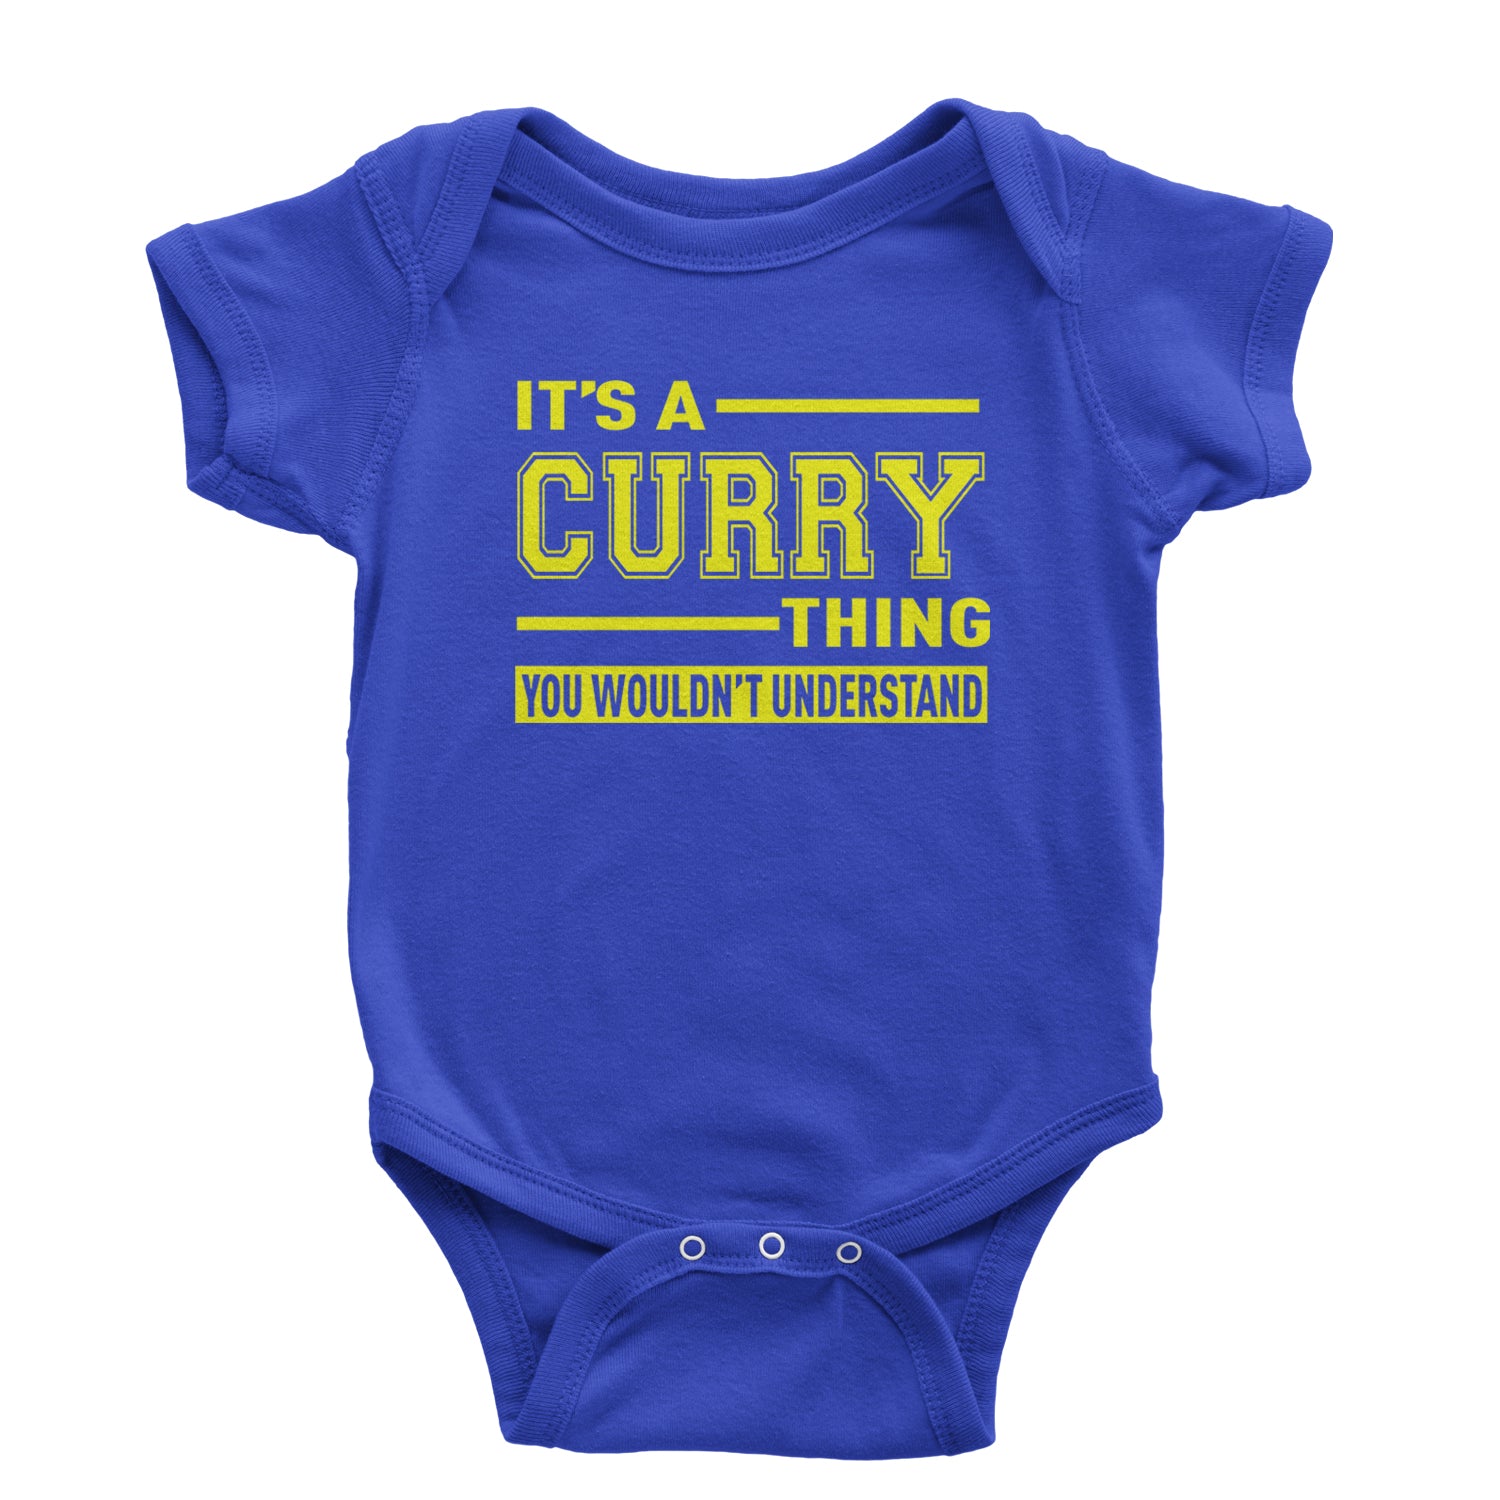 It's A Curry Thing, You Wouldn't Understand Basketball Infant One-Piece Romper Bodysuit and Toddler T-shirt